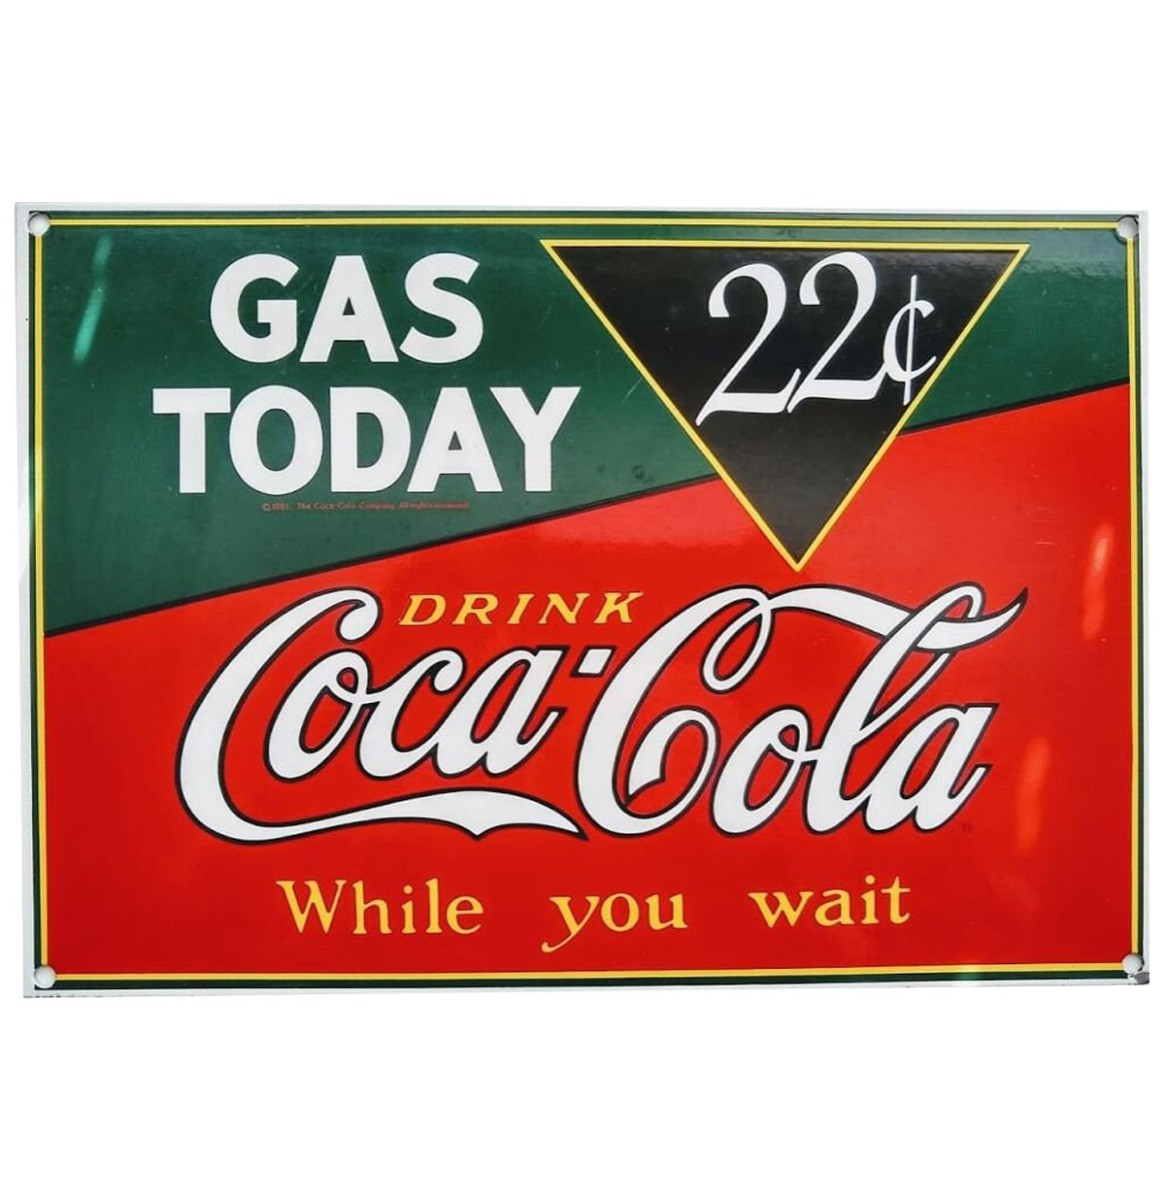 Coca-Cola Gas Today 22 Cents Emaille Bord - 33 x 23 cm